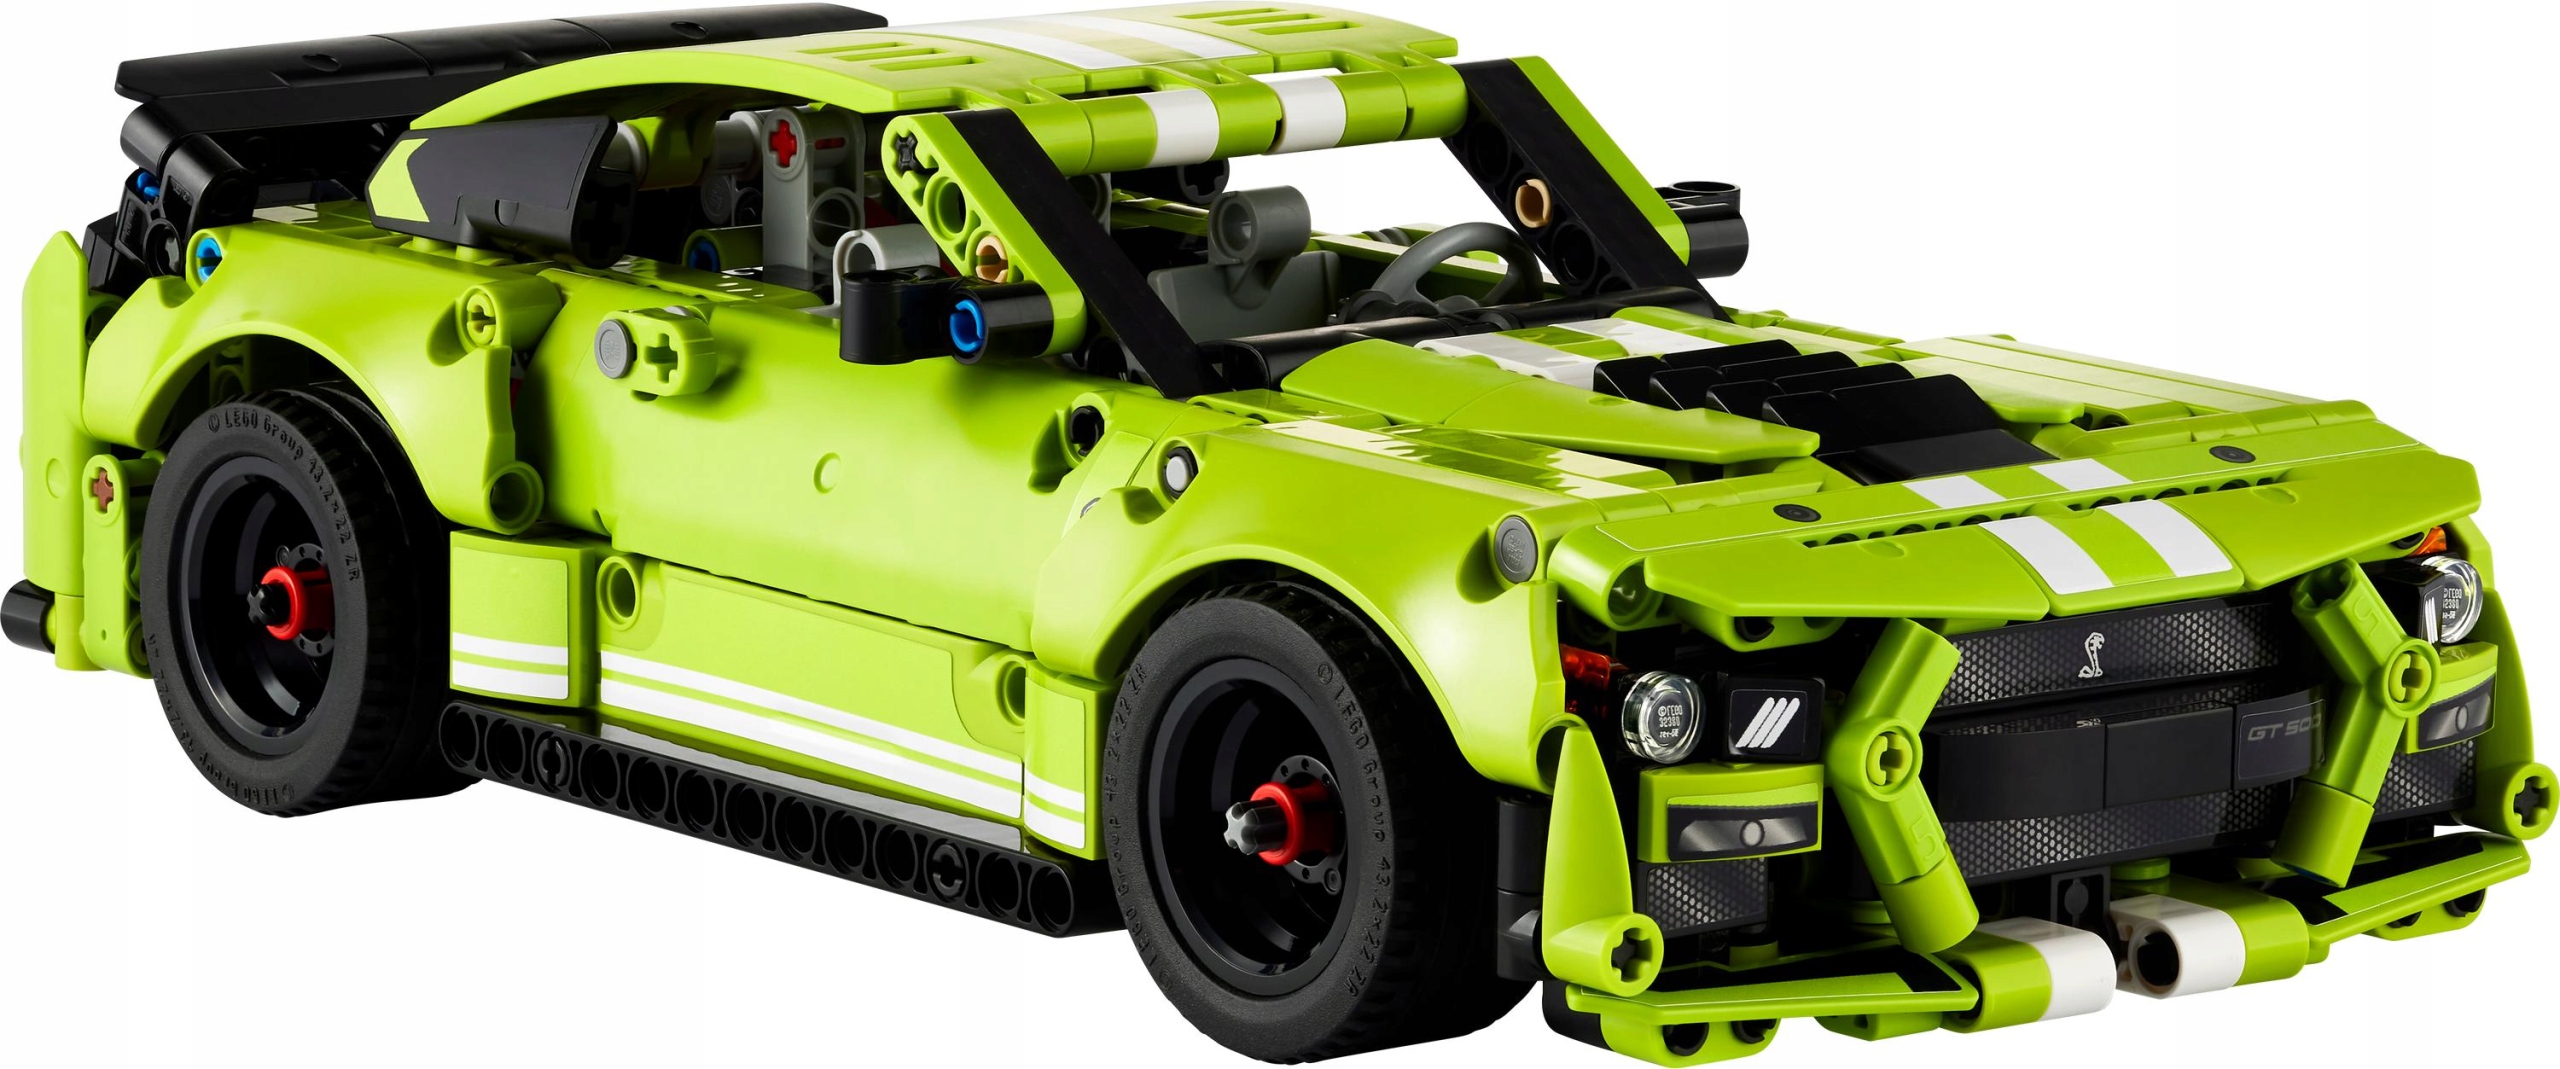 LEGO TECHNIC Ford Mustang Shelby GT500 42138 Назва набору Ford Mustang Shelby GT500 Pull Back